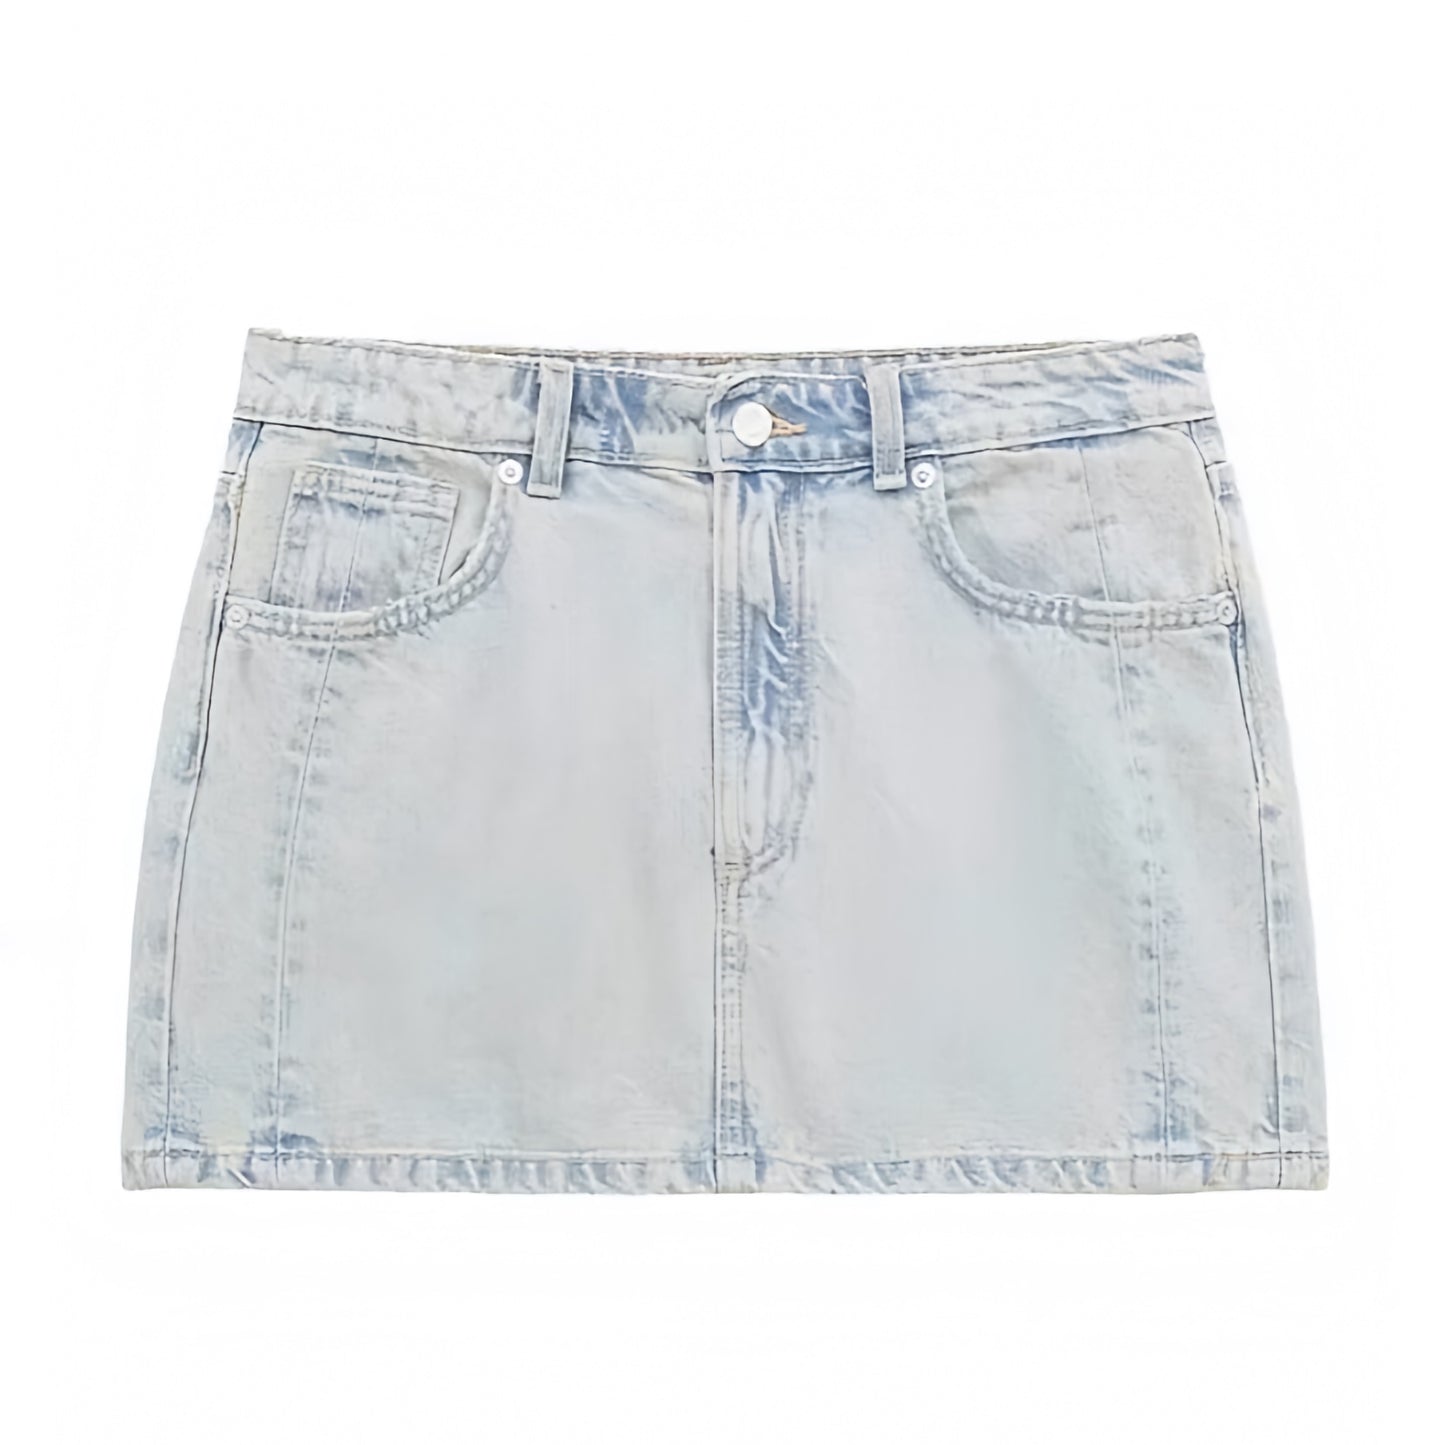 light-blue-bleach-wash-faded-distressed-vintage-retro-slim-fit-low-rise-waisted-tight-fitting-micro-mini-short-denim-jean-skirt-skort-with-pockets-women-ladies-teens-tweens-chic-trendy-spring-2024-summer-casual-feminine-western-y2k-cocktail-party-sexy-date-night-out-club-wear-90s-minimalist-minimalism-stockholm-style-skirts-zara-revolve-aritzia-reformation-dupe